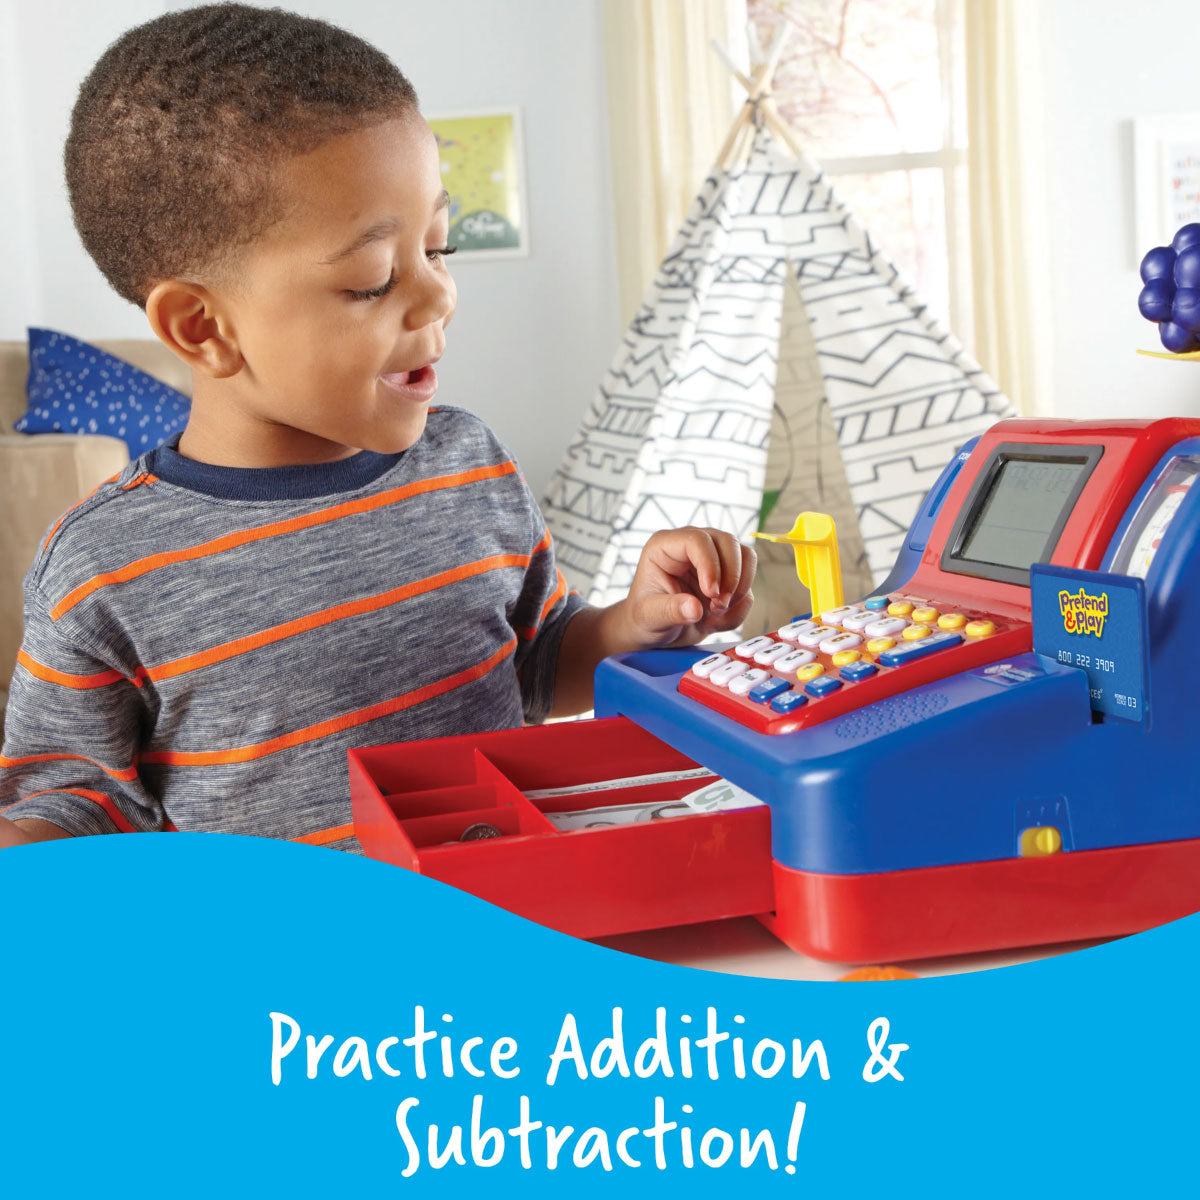 Learning Resources Pretend & Play Electronic Teaching Cash Register